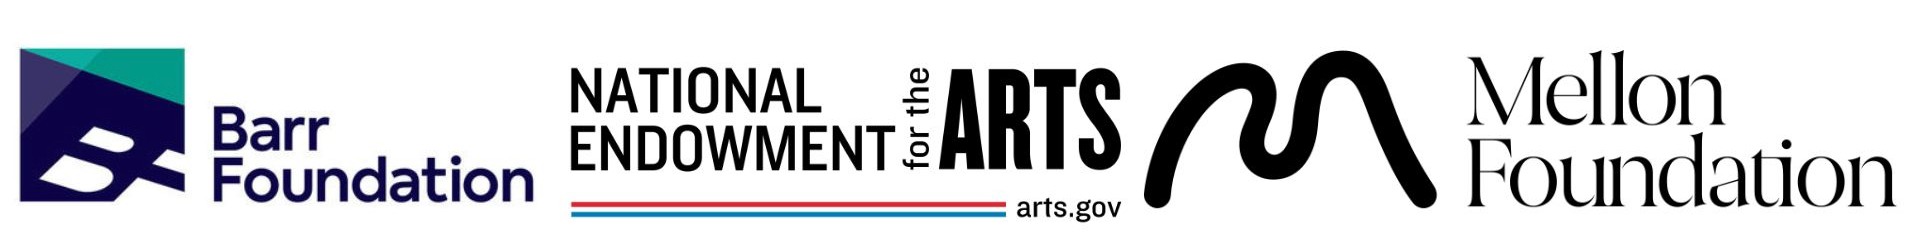 Logos for the Barr Foundation, the National Endowment for the Arts, and the Mellon Foundation